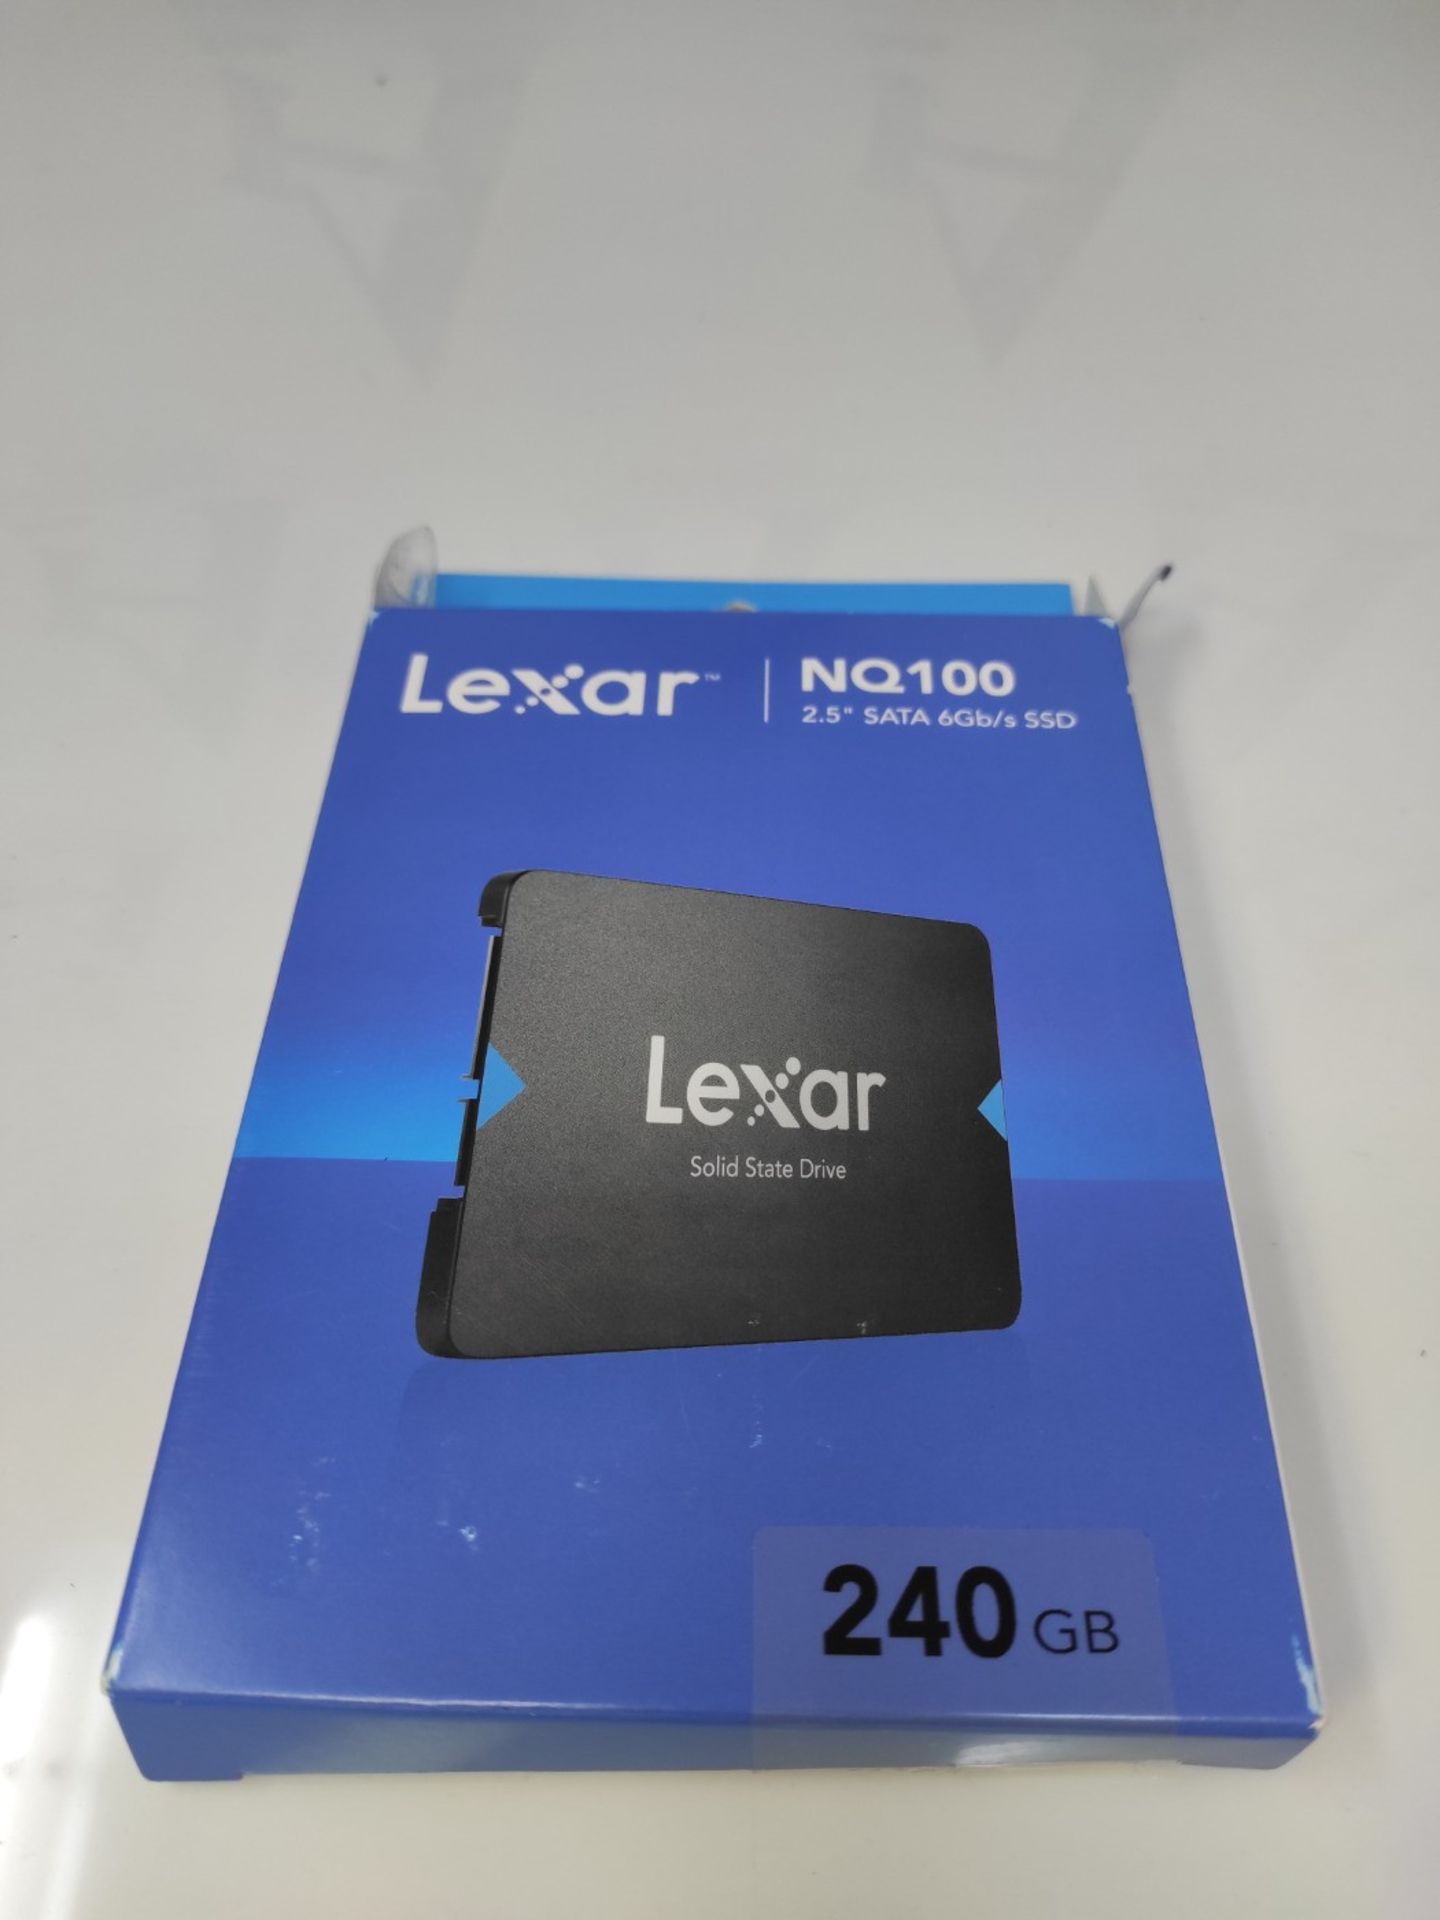 Lexar NQ100 2.5" SATA III (6 Gb/s) 240 GB SSD, Up to 550 MB/s Read Solid State Drive, - Image 2 of 3